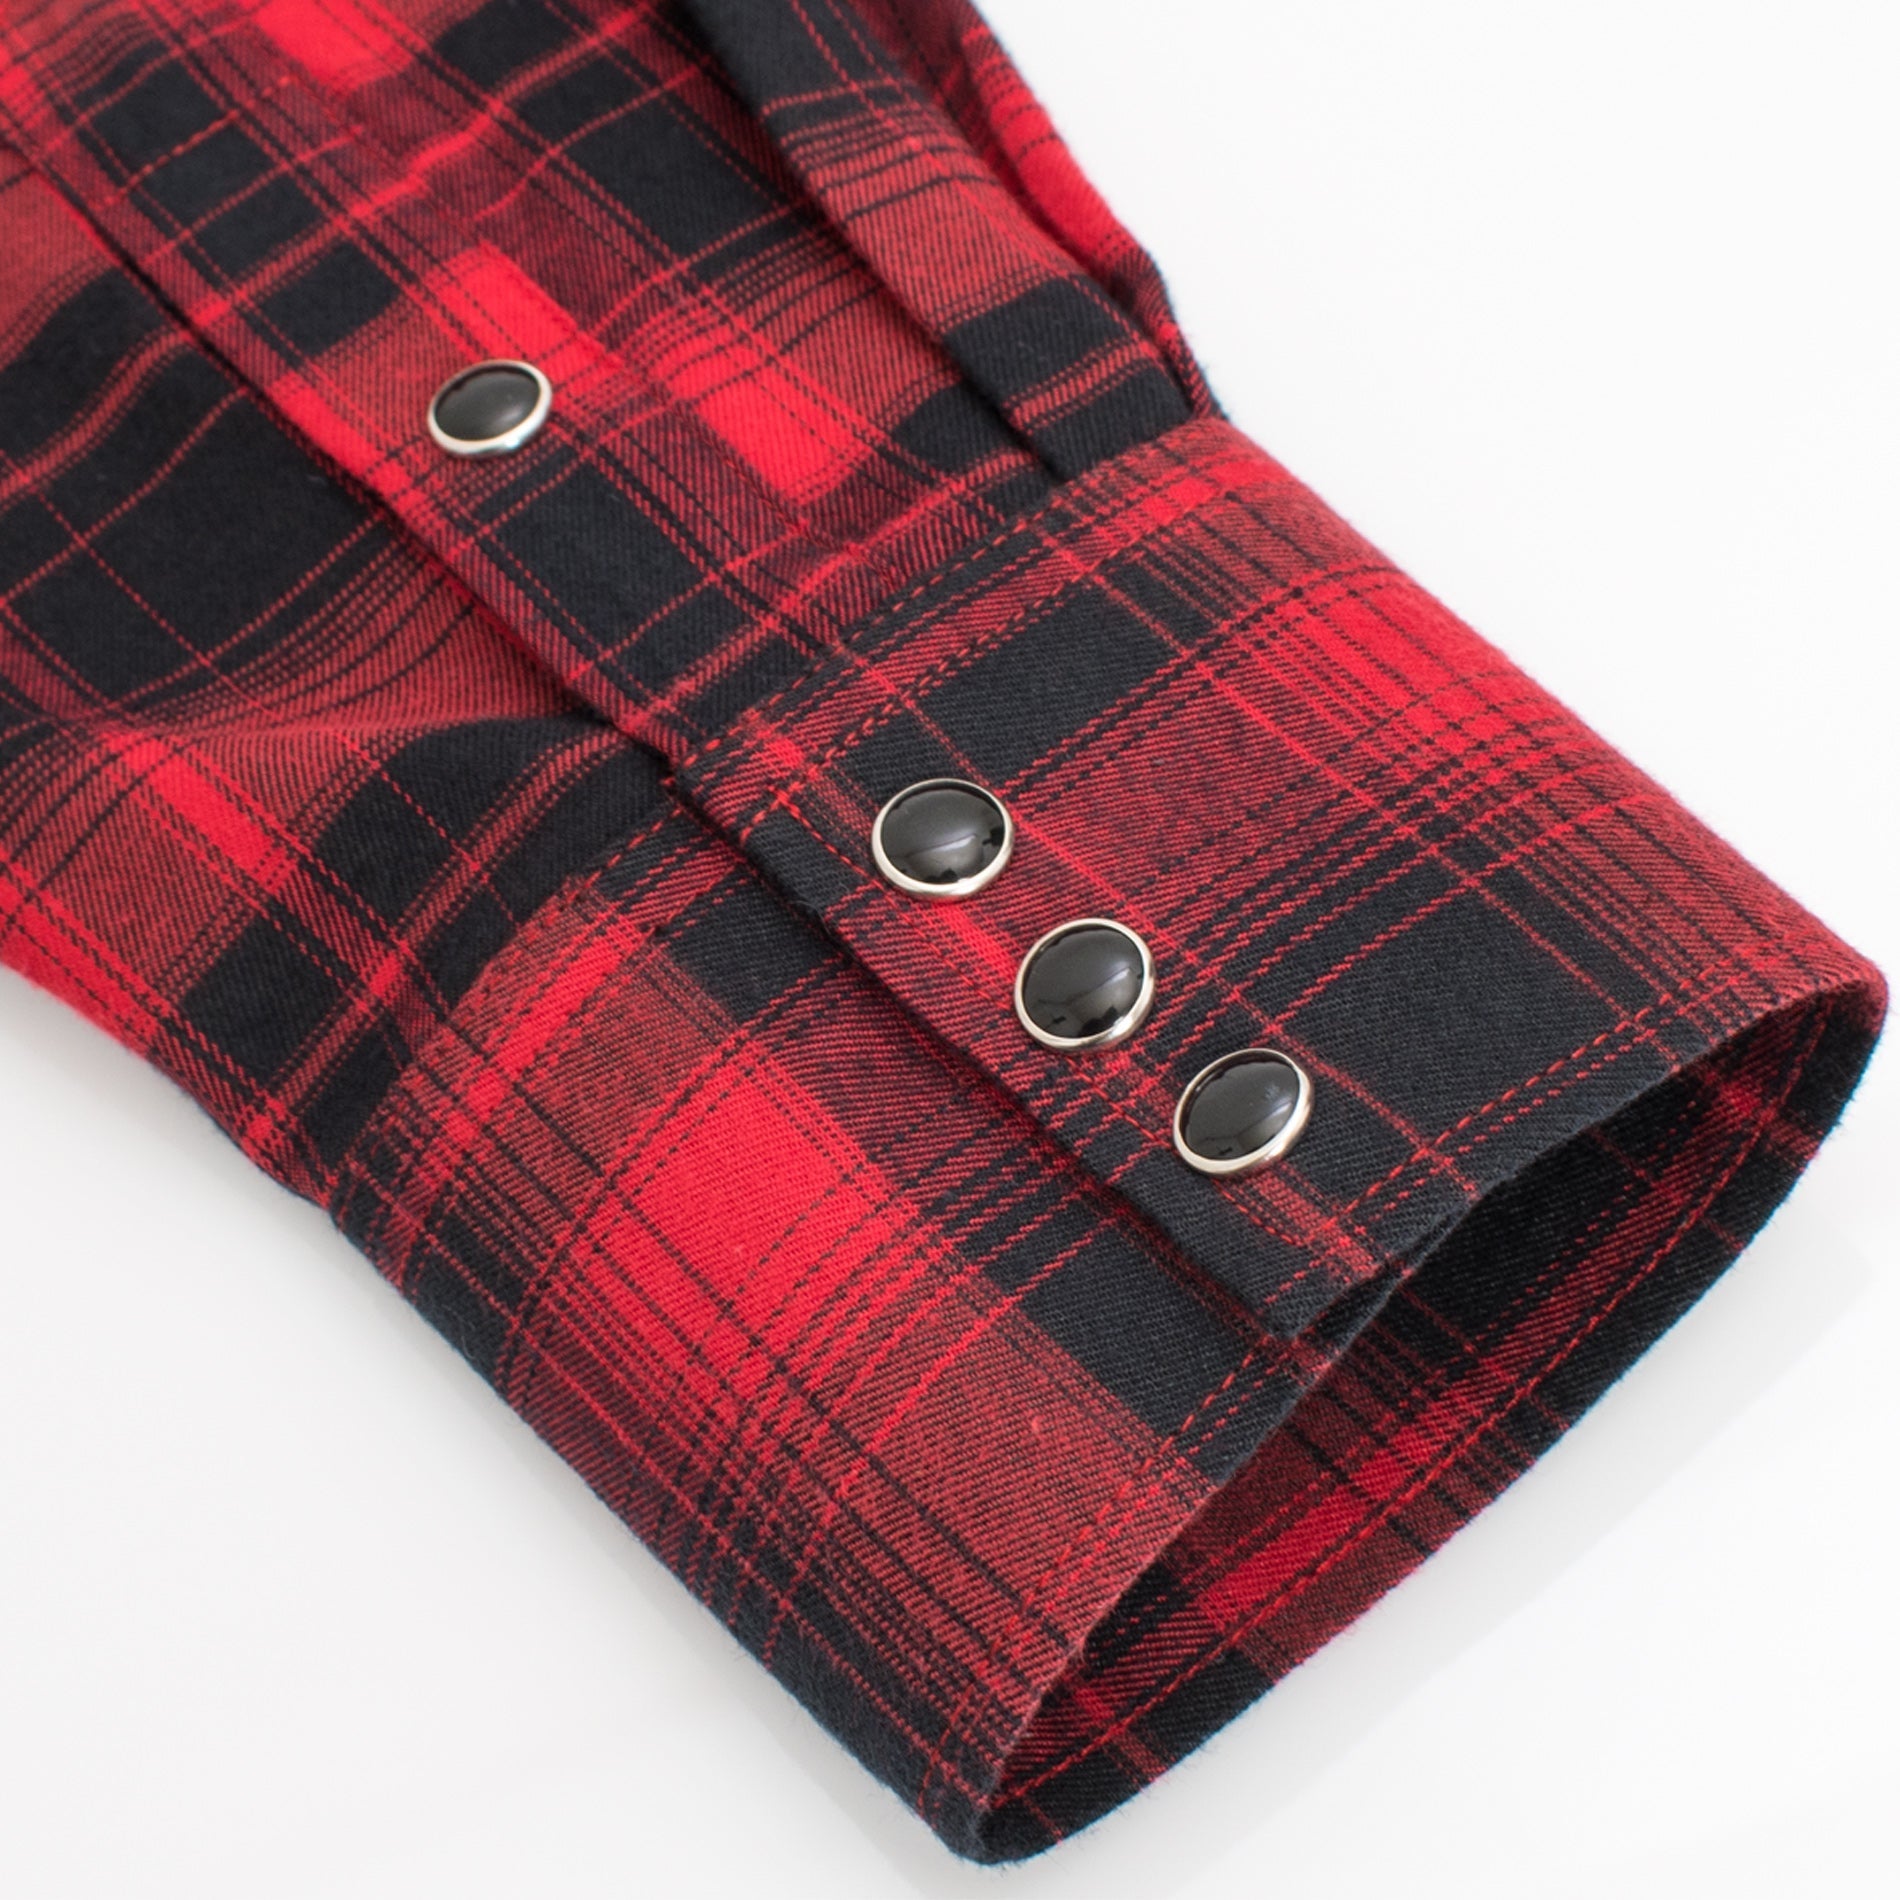 Men's Western Flannel Shirts With Snap Buttons -FLS300-302